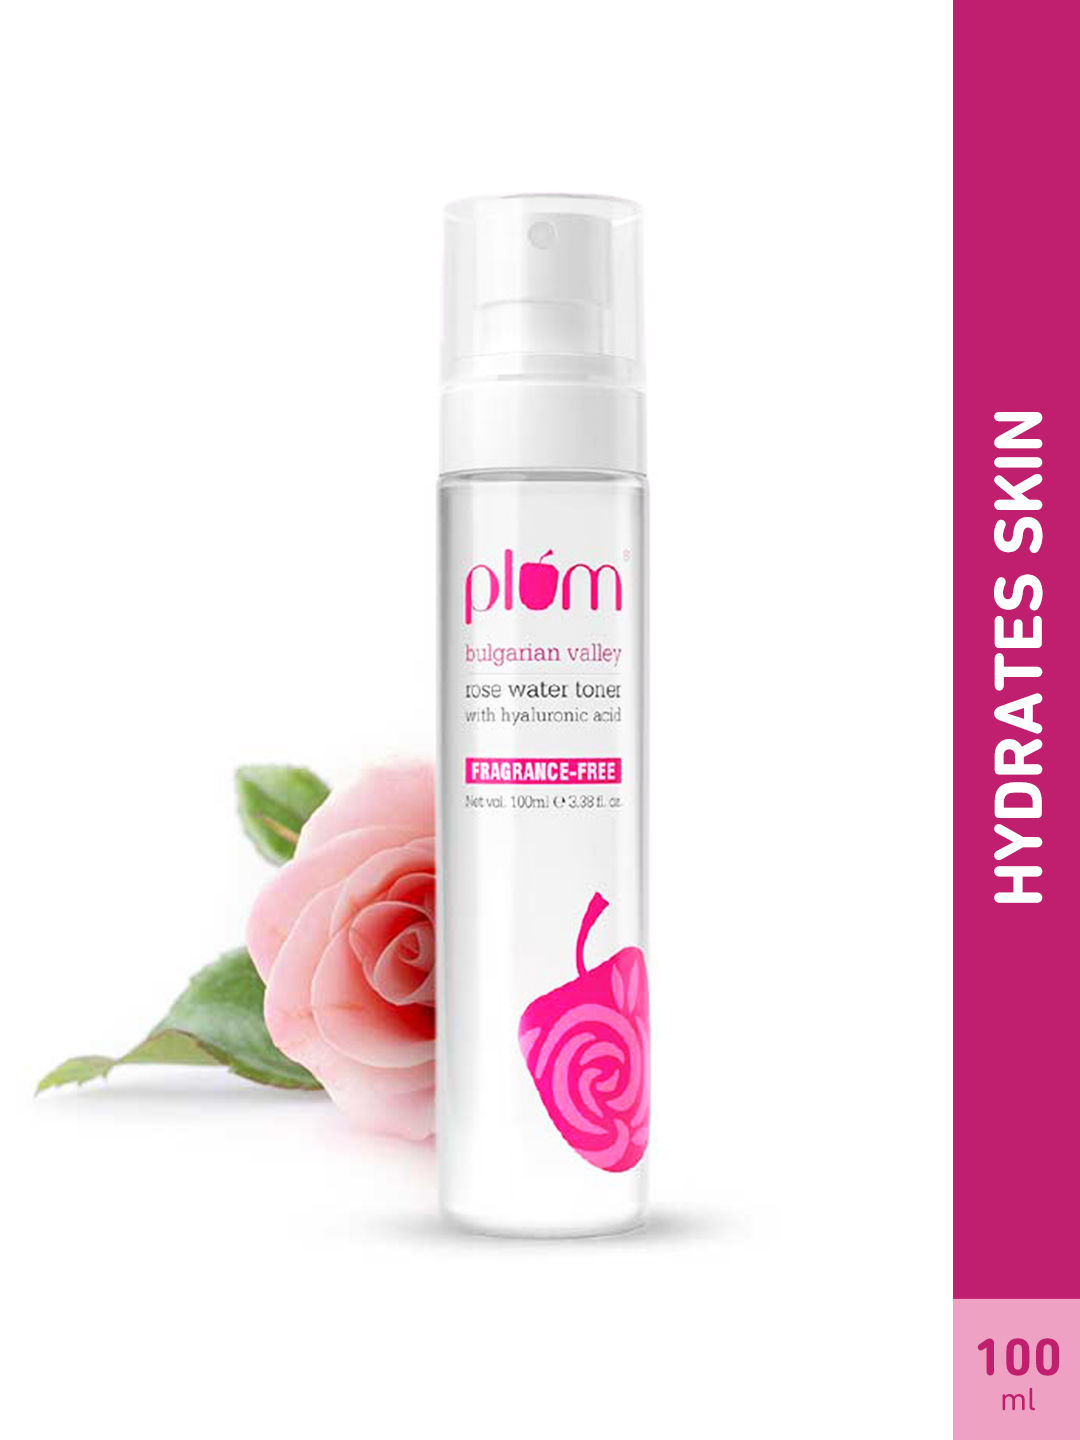 Buy Plum Bulgarian Valley Rose Water Alcohol-Free Spray Toner With Hyaluronic Acid, Hydrates & Refreshes 100ml - Purplle